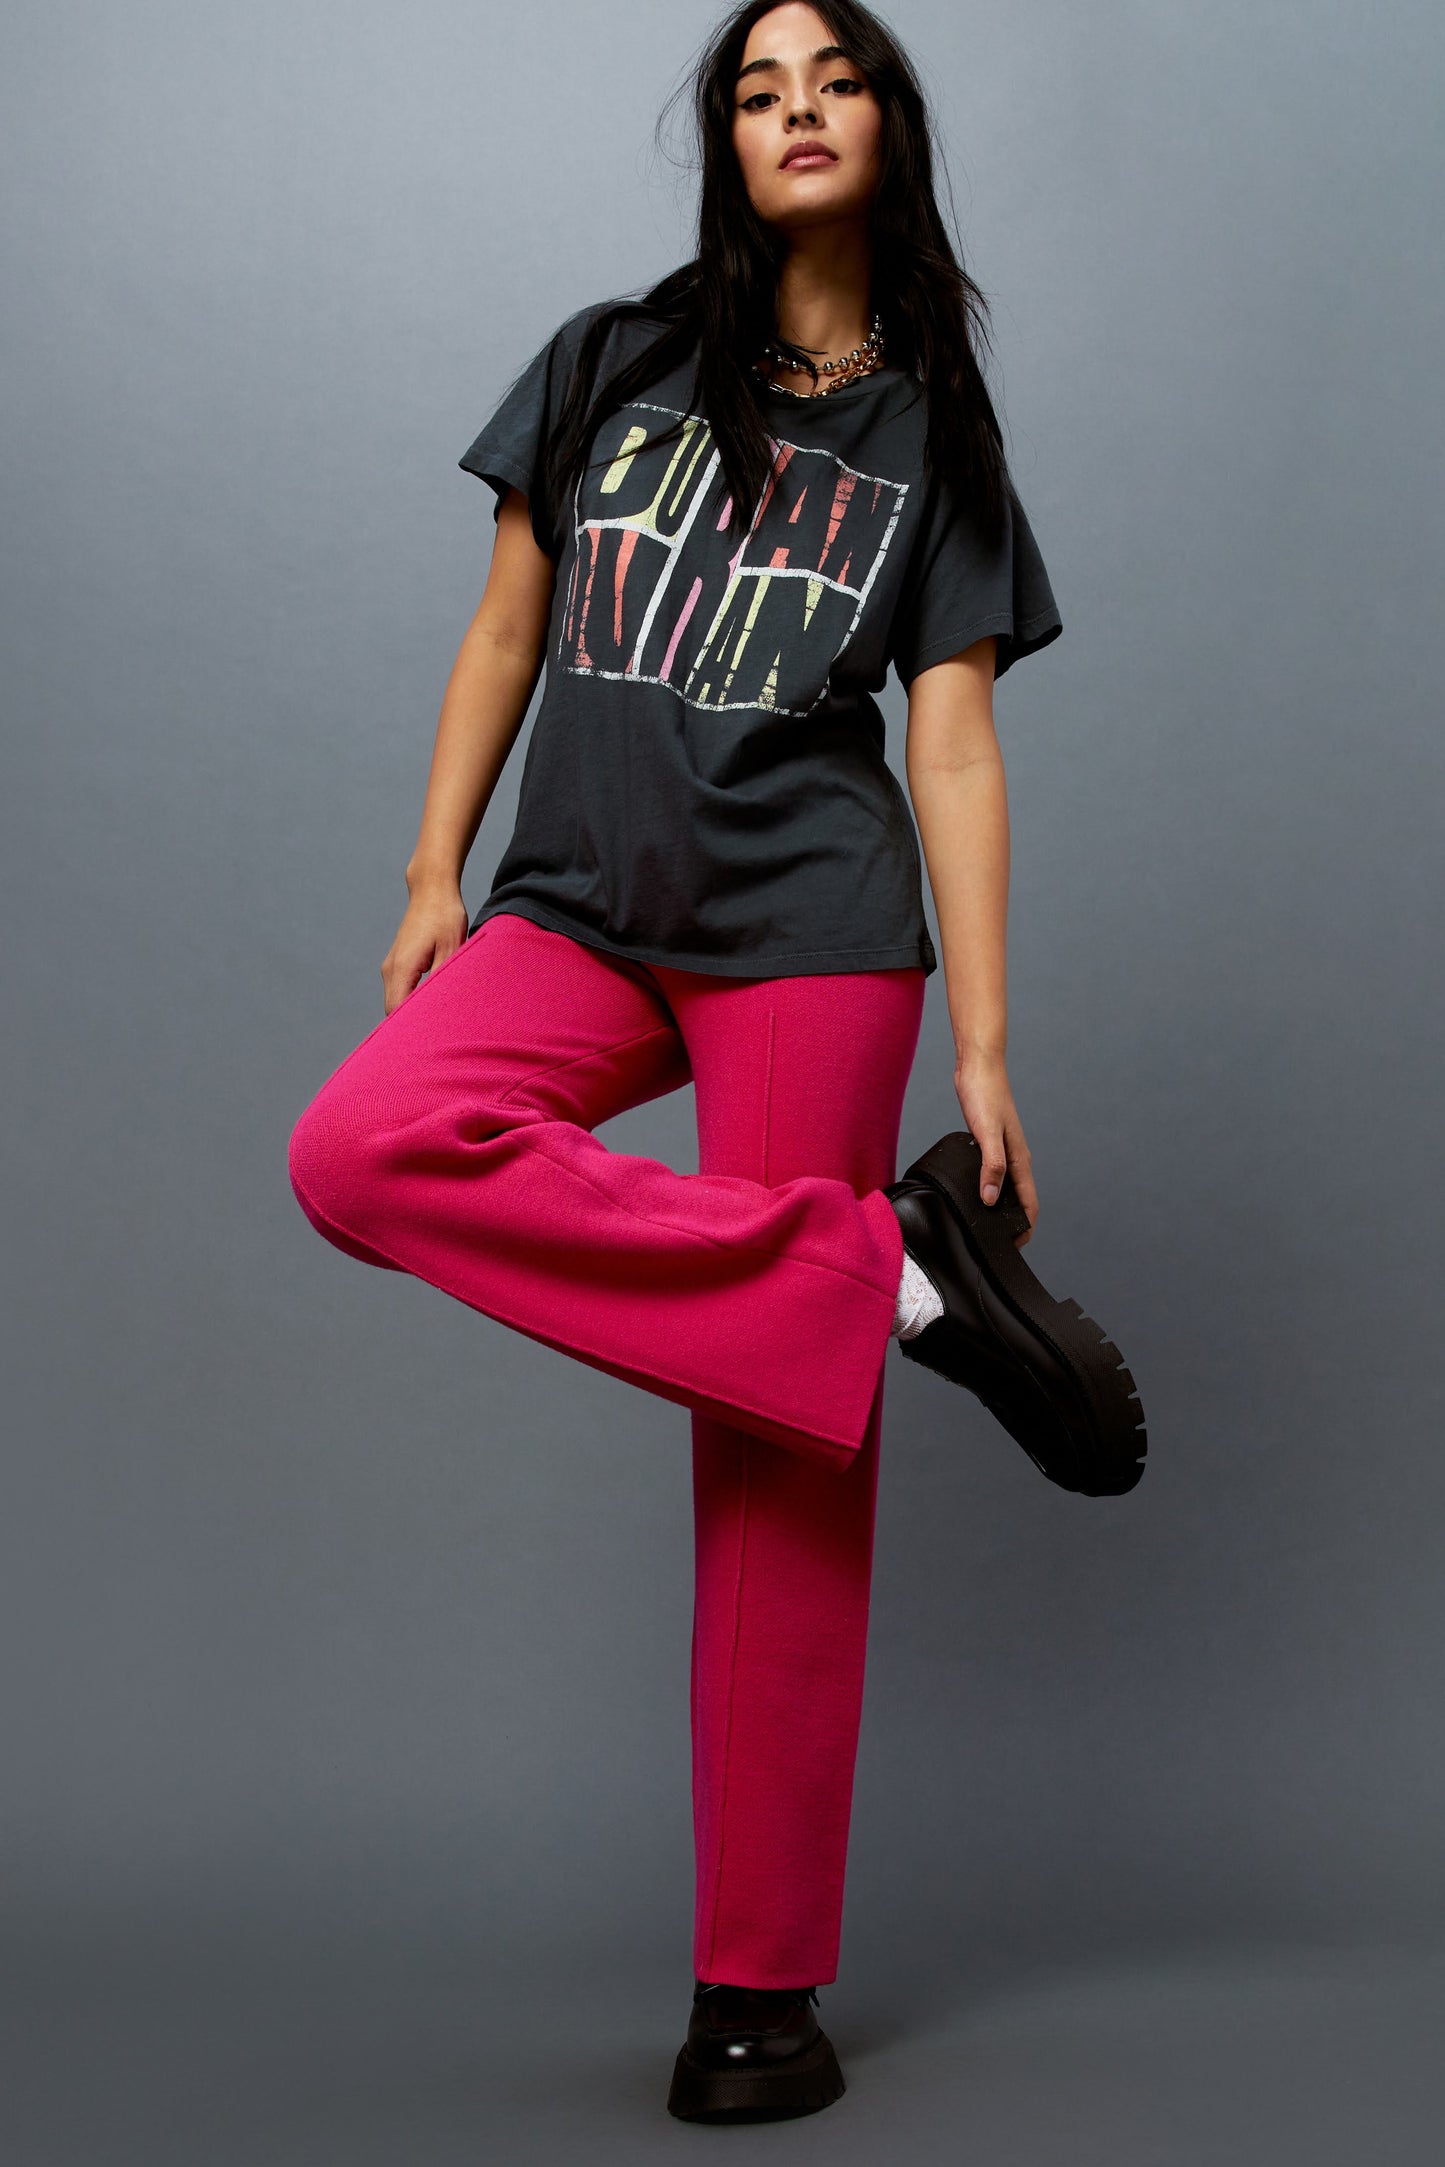 Model wearing a Duran Duran graphic tee styled with knit pintuck pants in pink rose